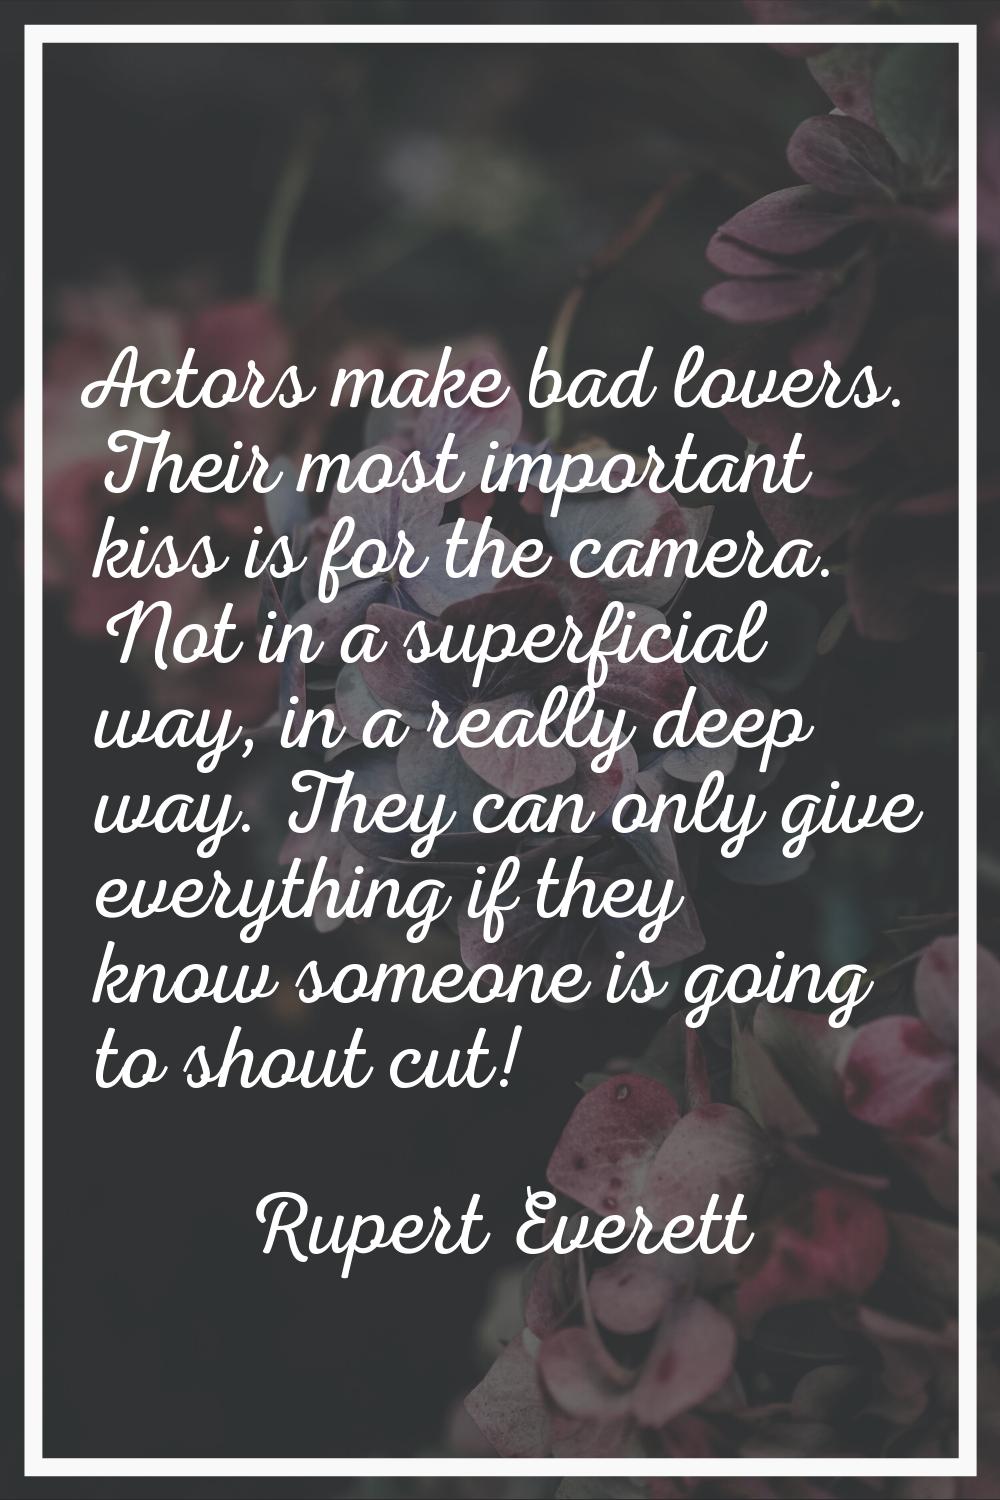 Actors make bad lovers. Their most important kiss is for the camera. Not in a superficial way, in a